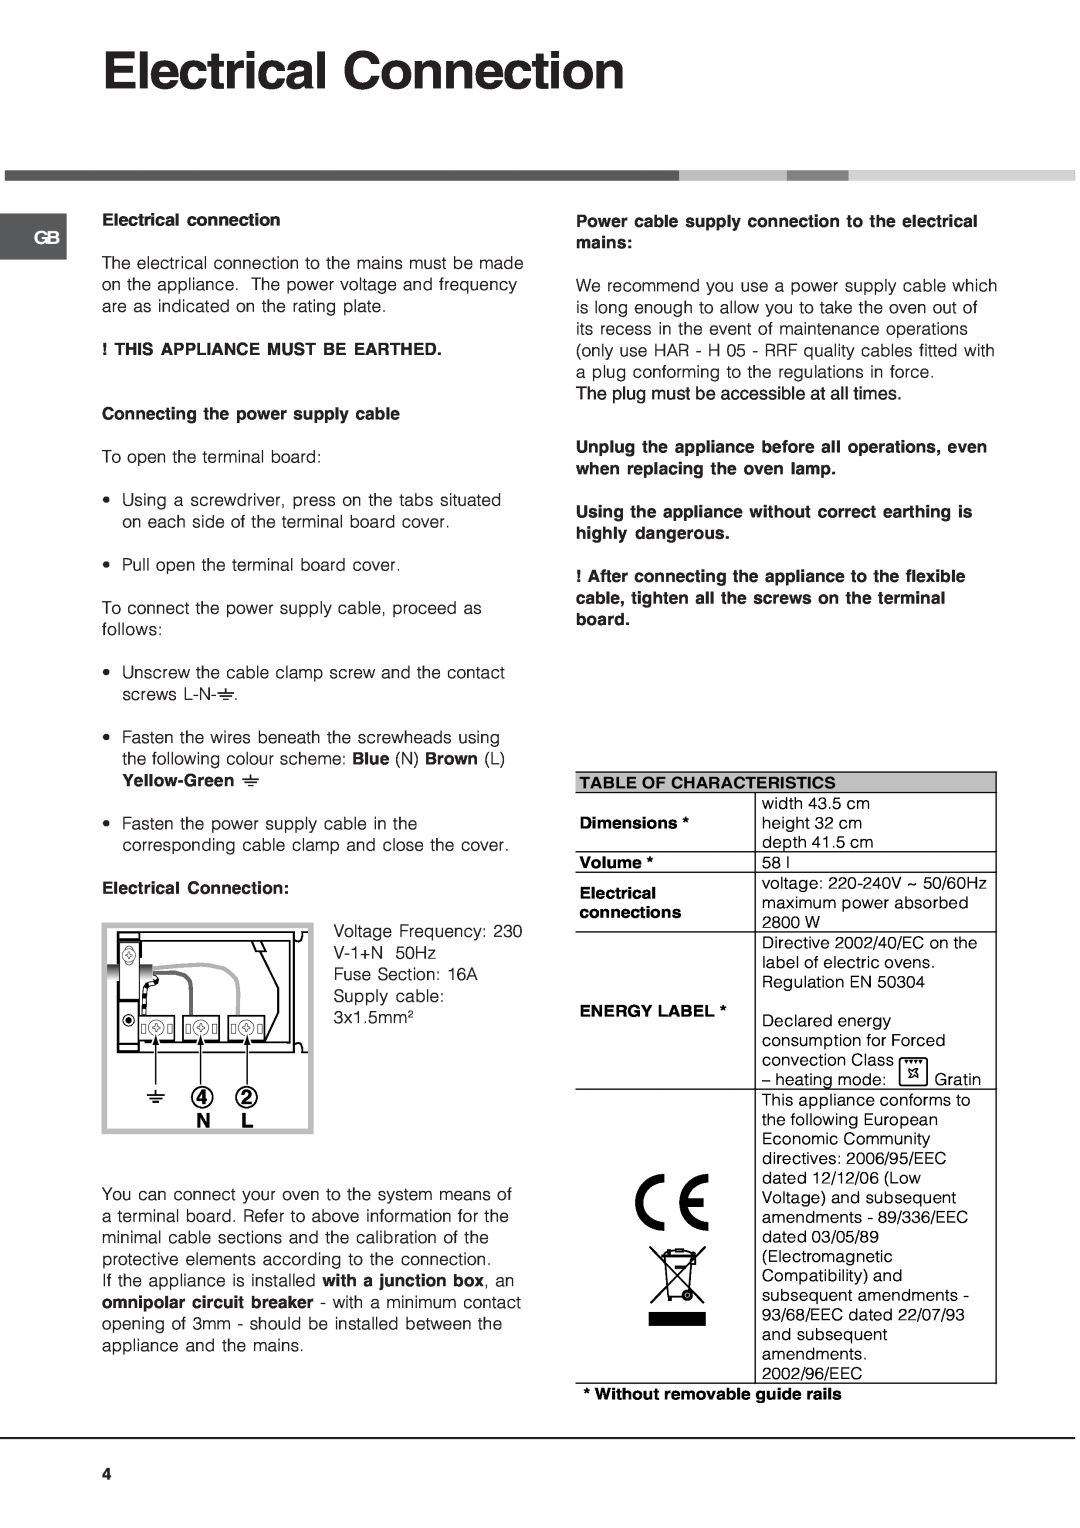 Hotpoint SE48101PGX manual Electrical Connection, 4 2 N L, The plug must be accessible at all times 